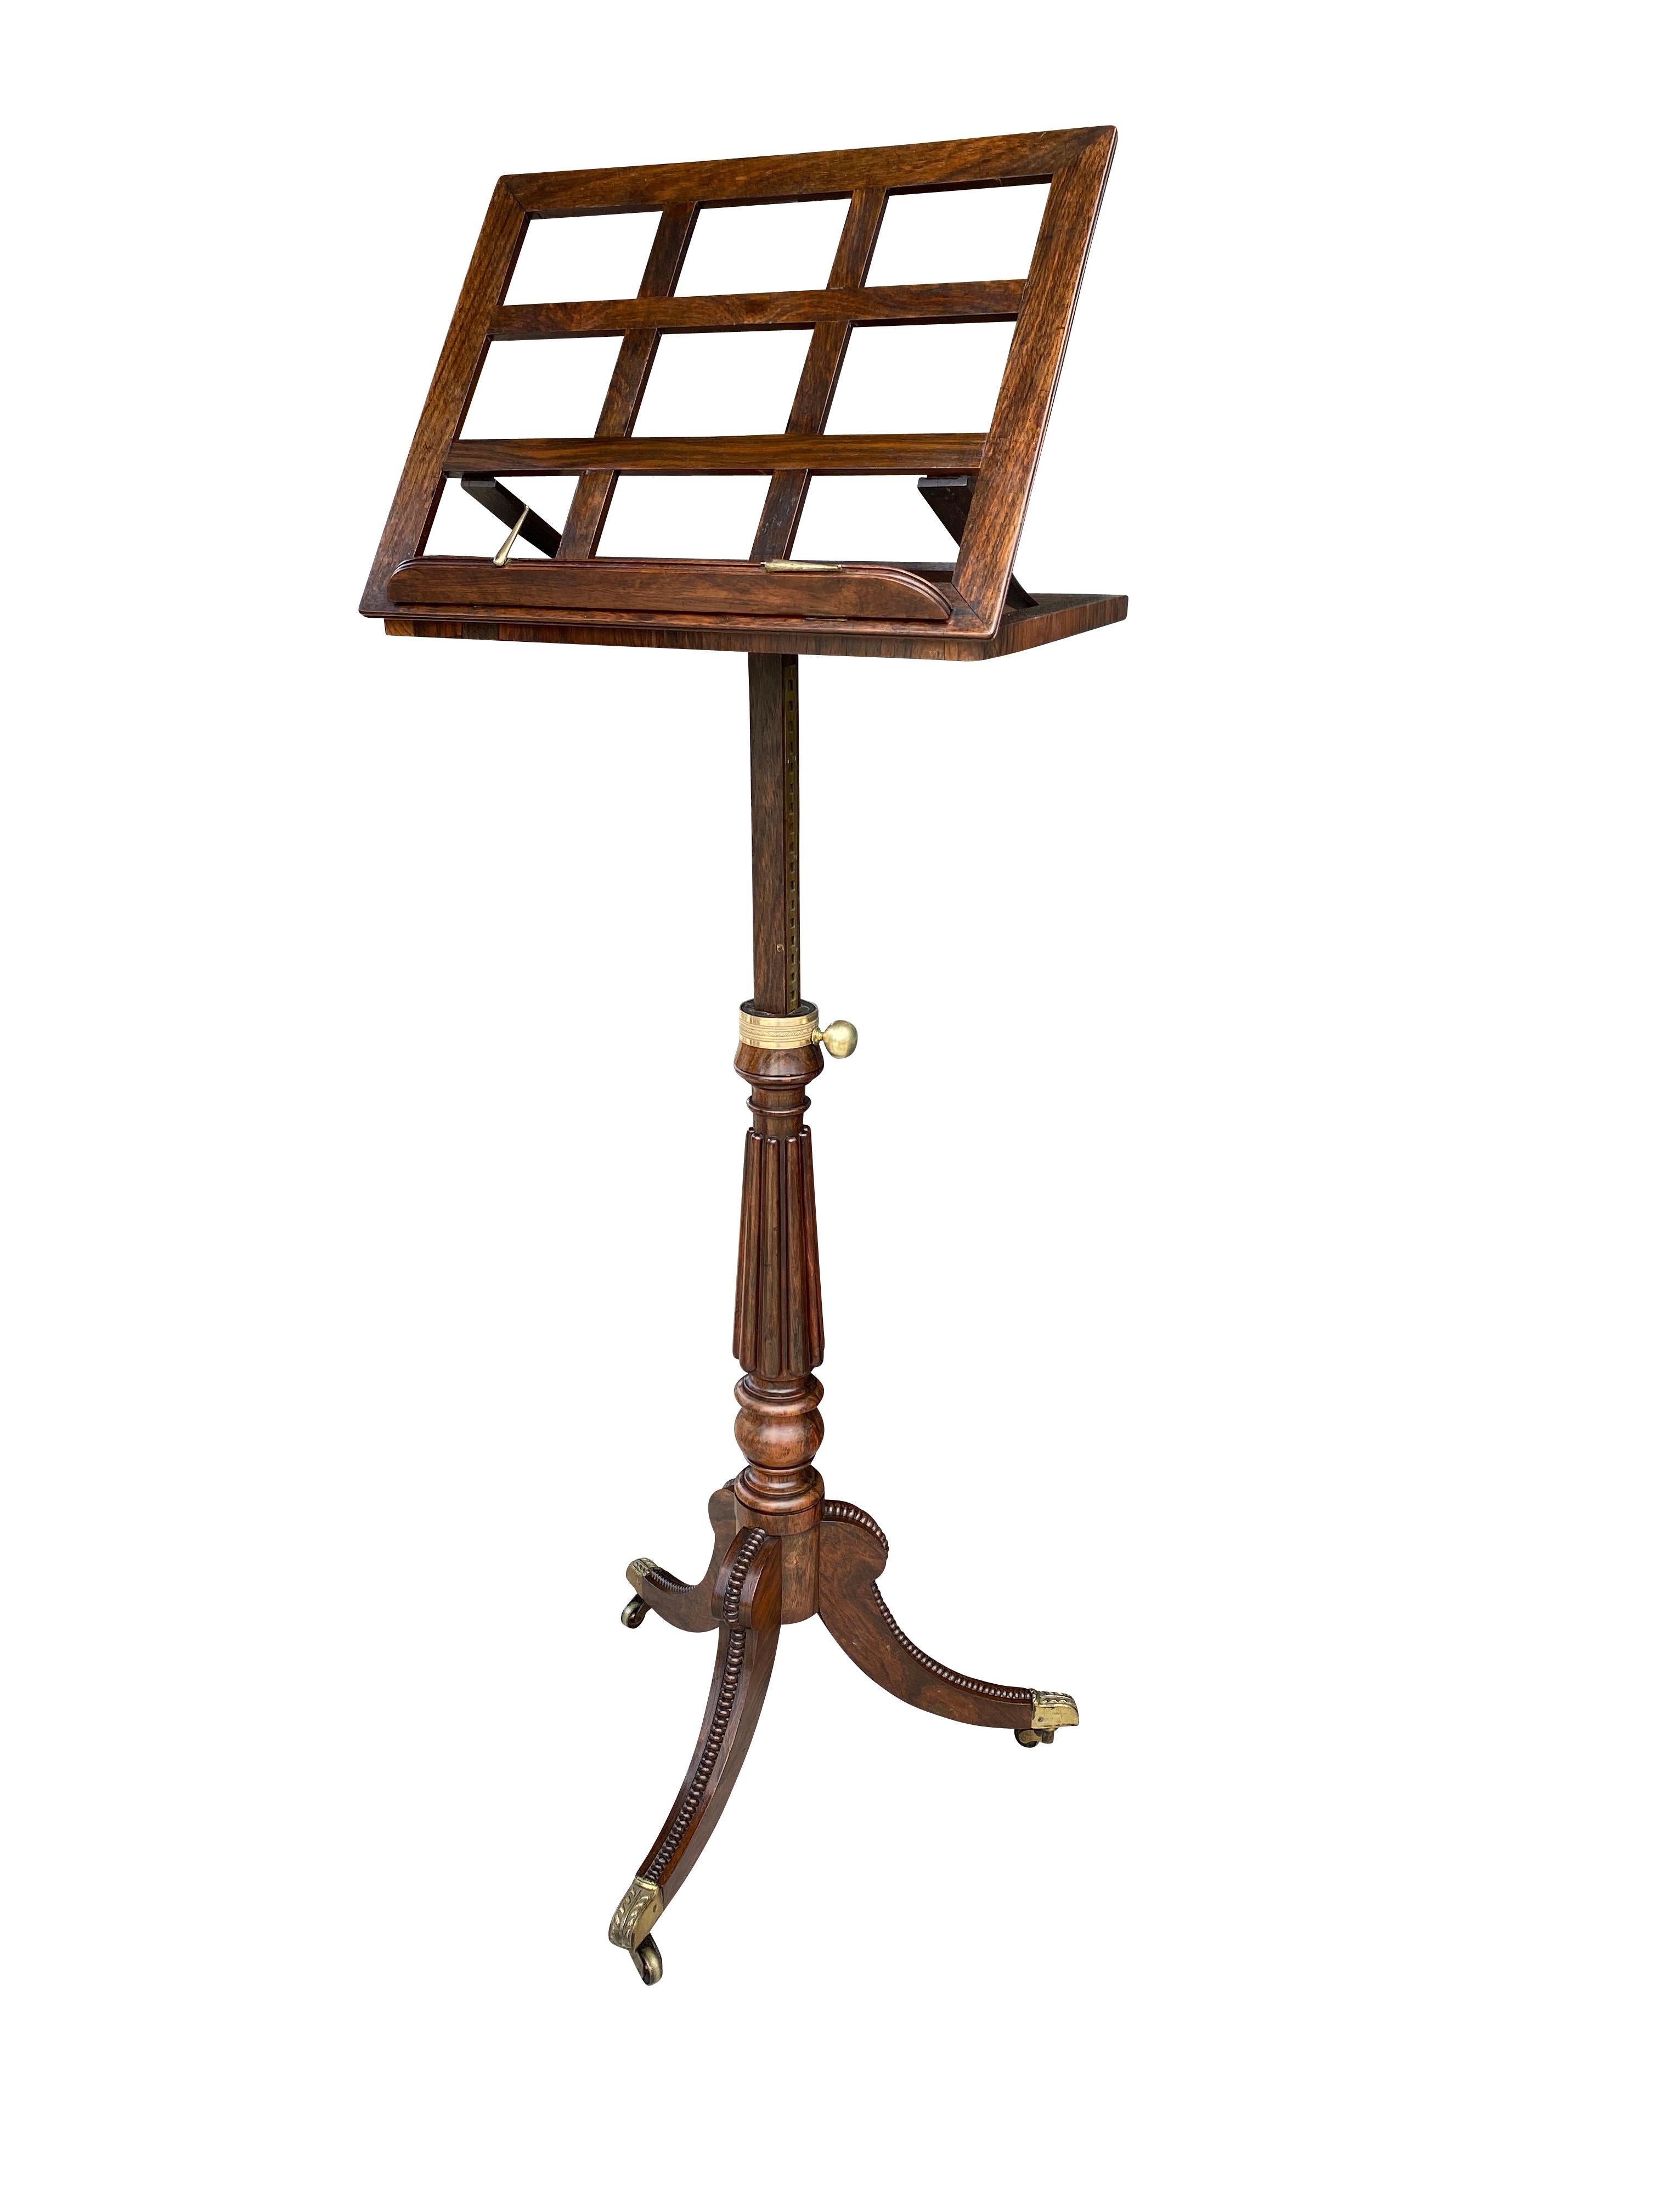 With hinged trellis adjustable holder and hinged folding book rest raised on a reeded support headed by a brass knob to adjust height, raised on three saber legs with cup casters. Likely by Gillow.